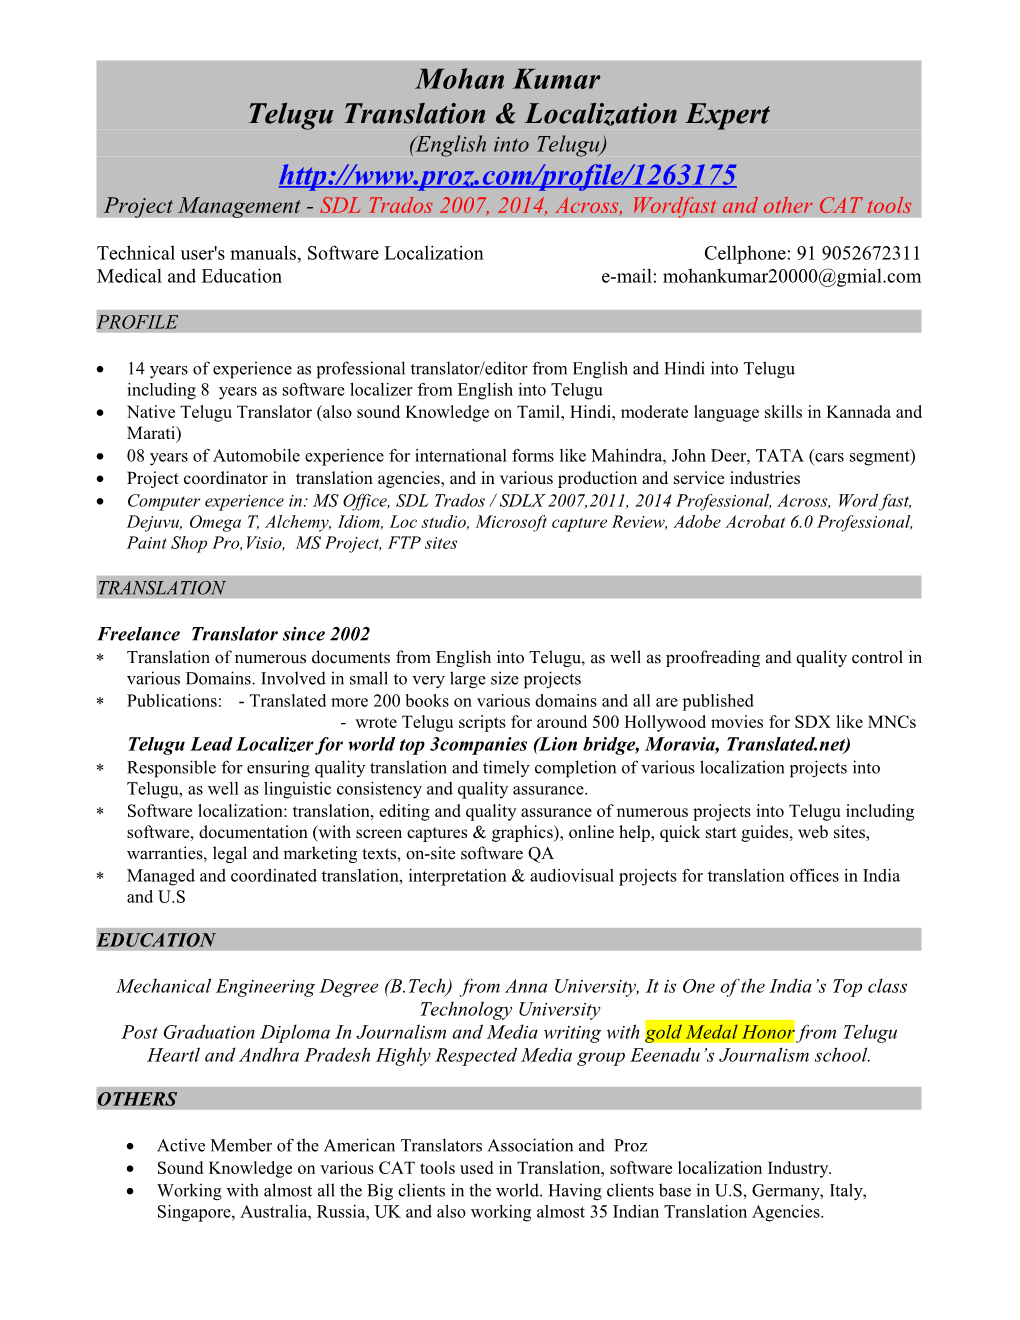 CV in English for Project Management